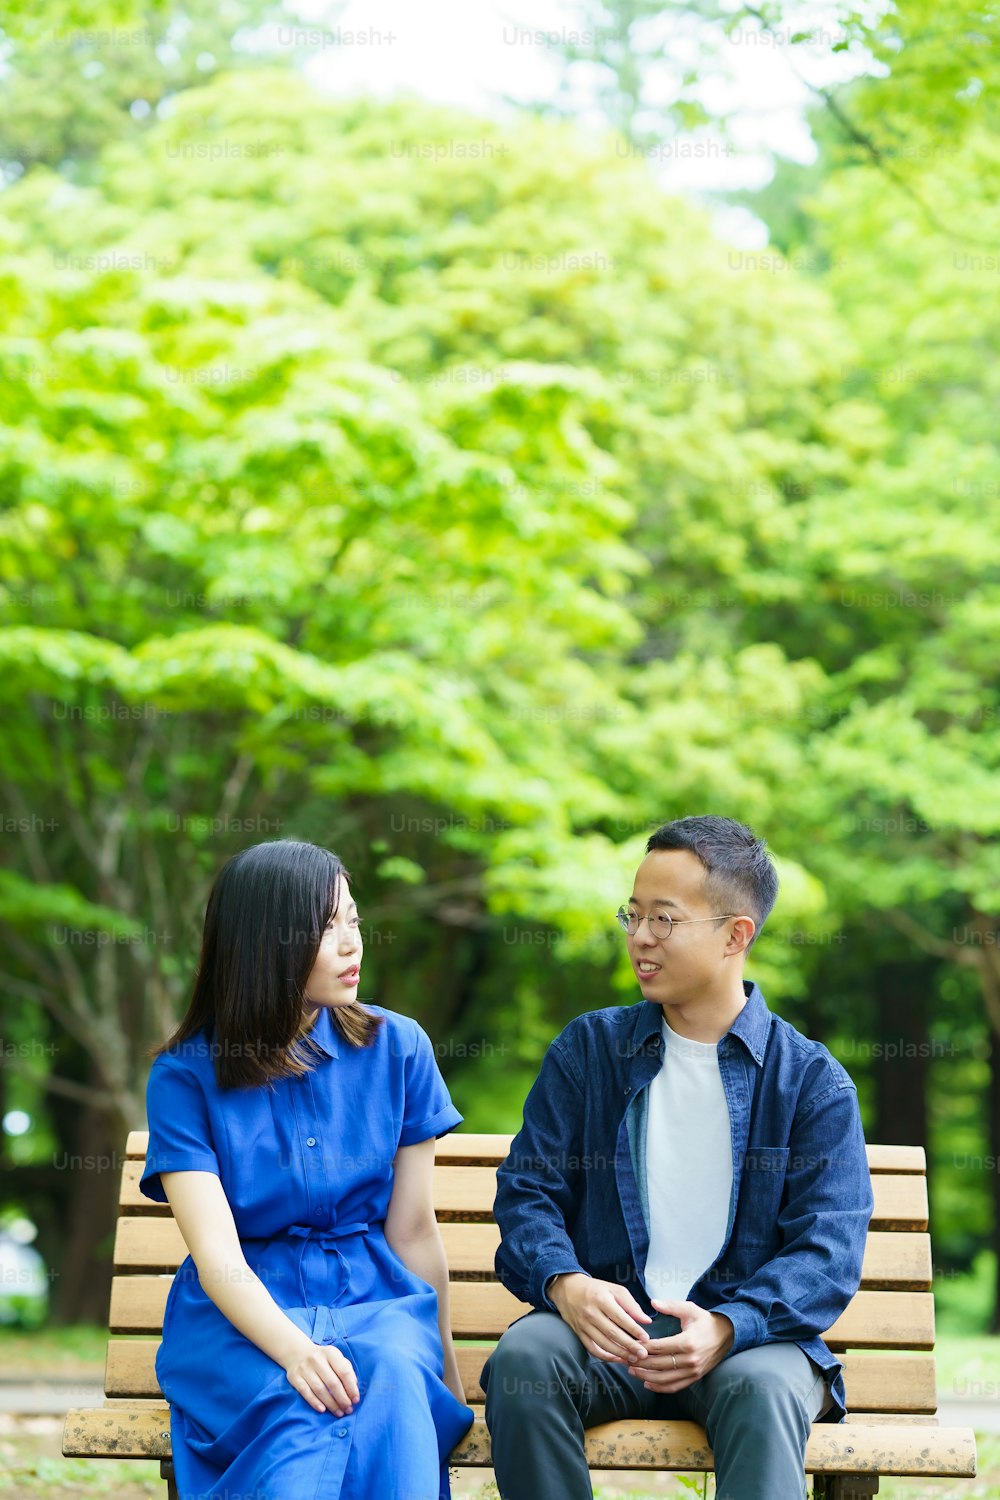 A young couple chatting on a bench in a green park